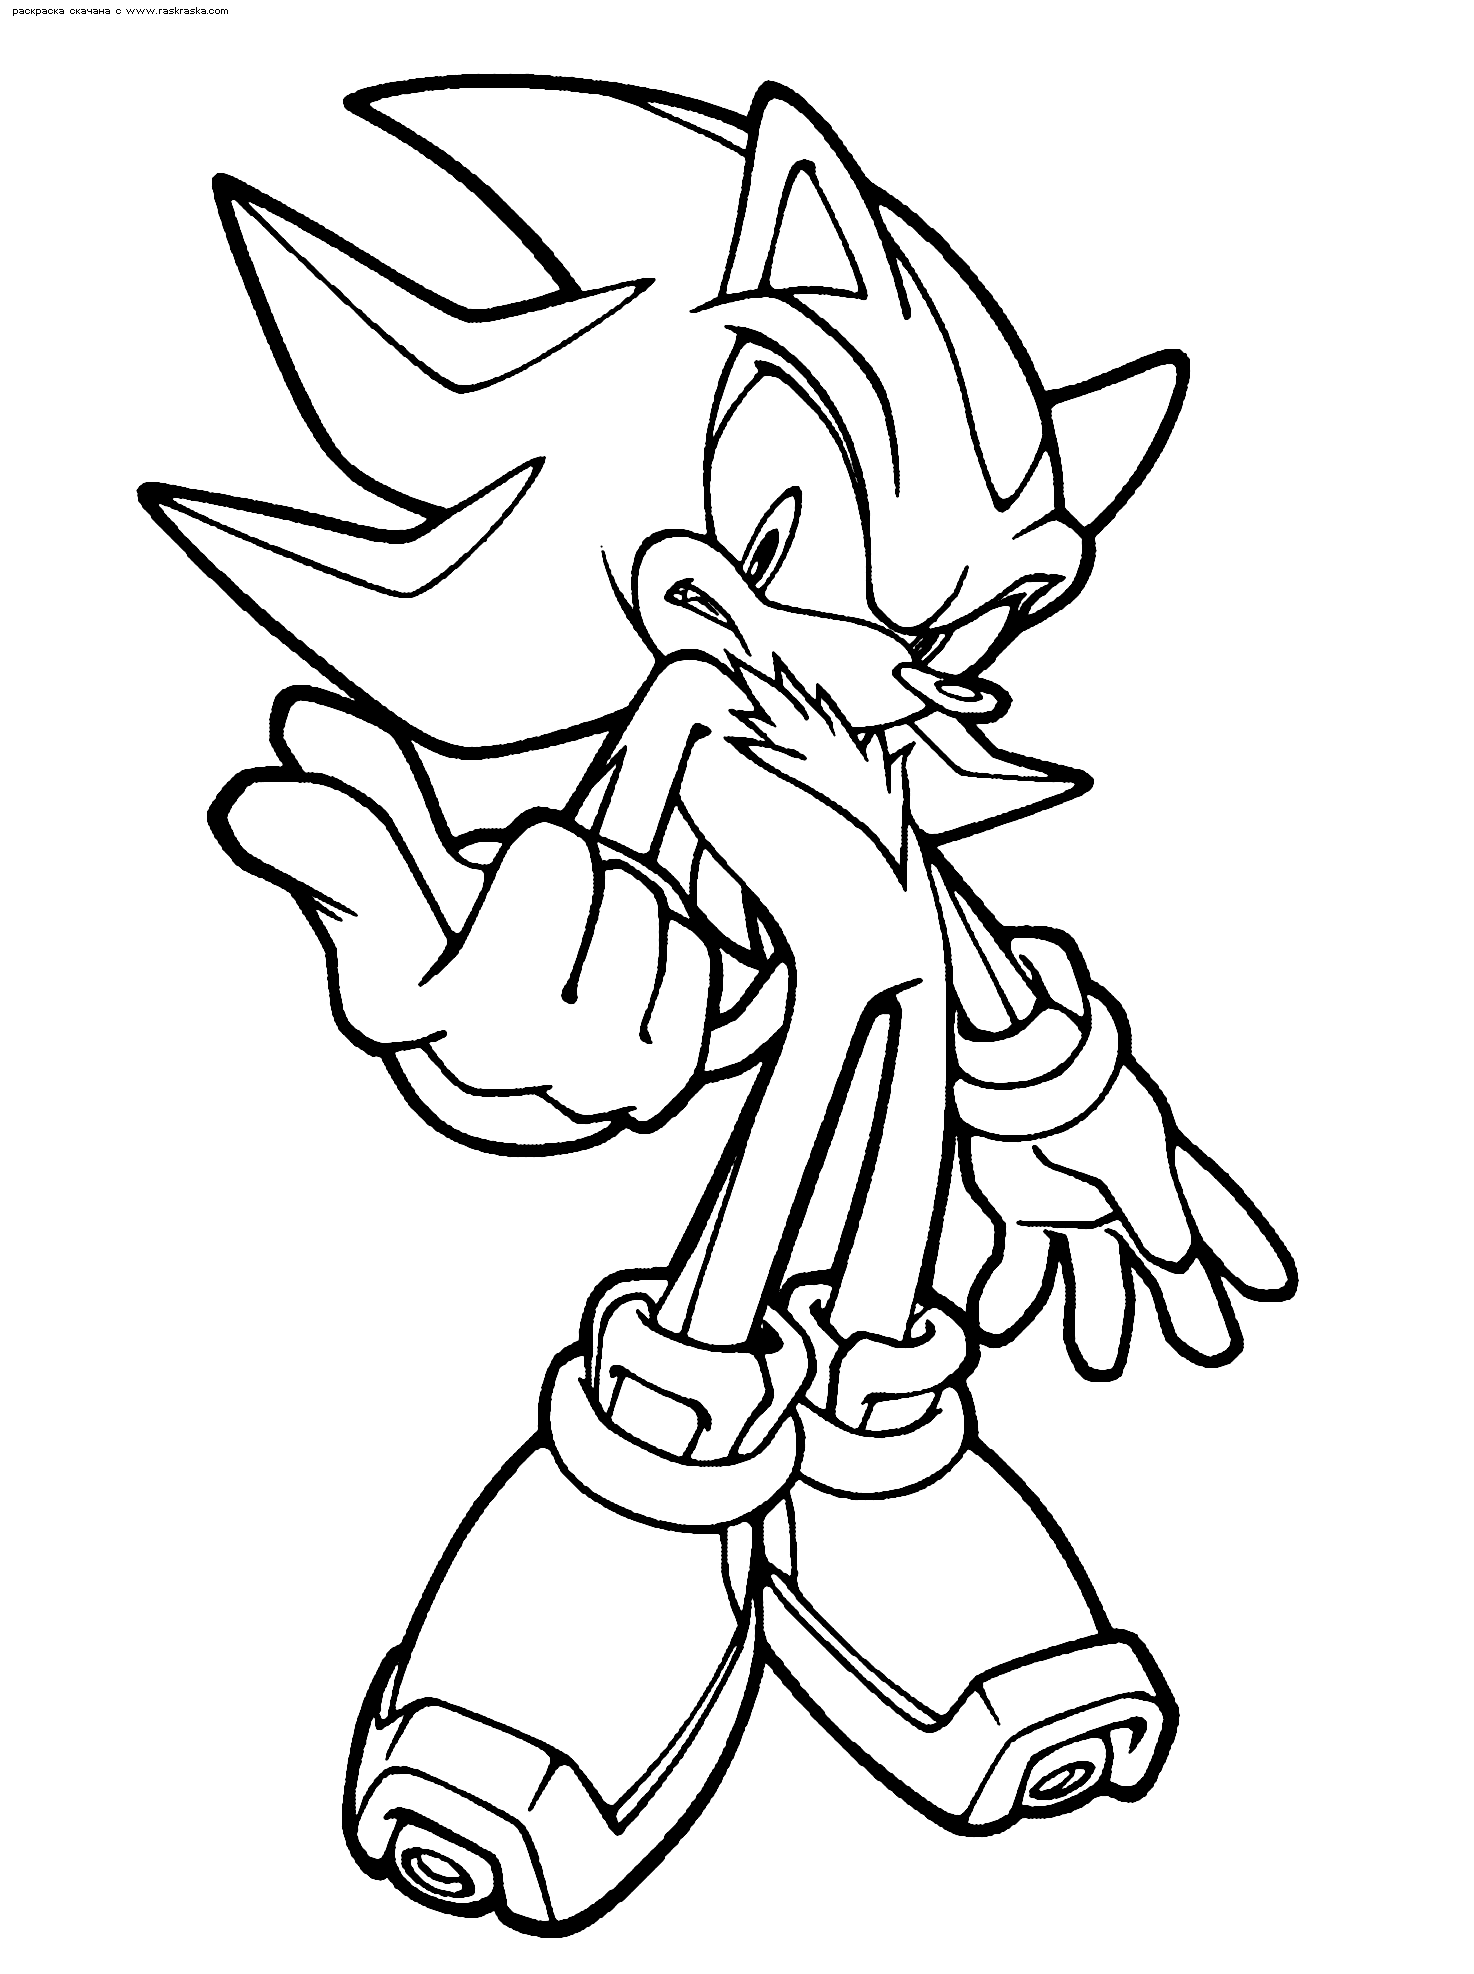 Shadow The Hedgehog To Print - Coloring Pages for Kids and for Adults